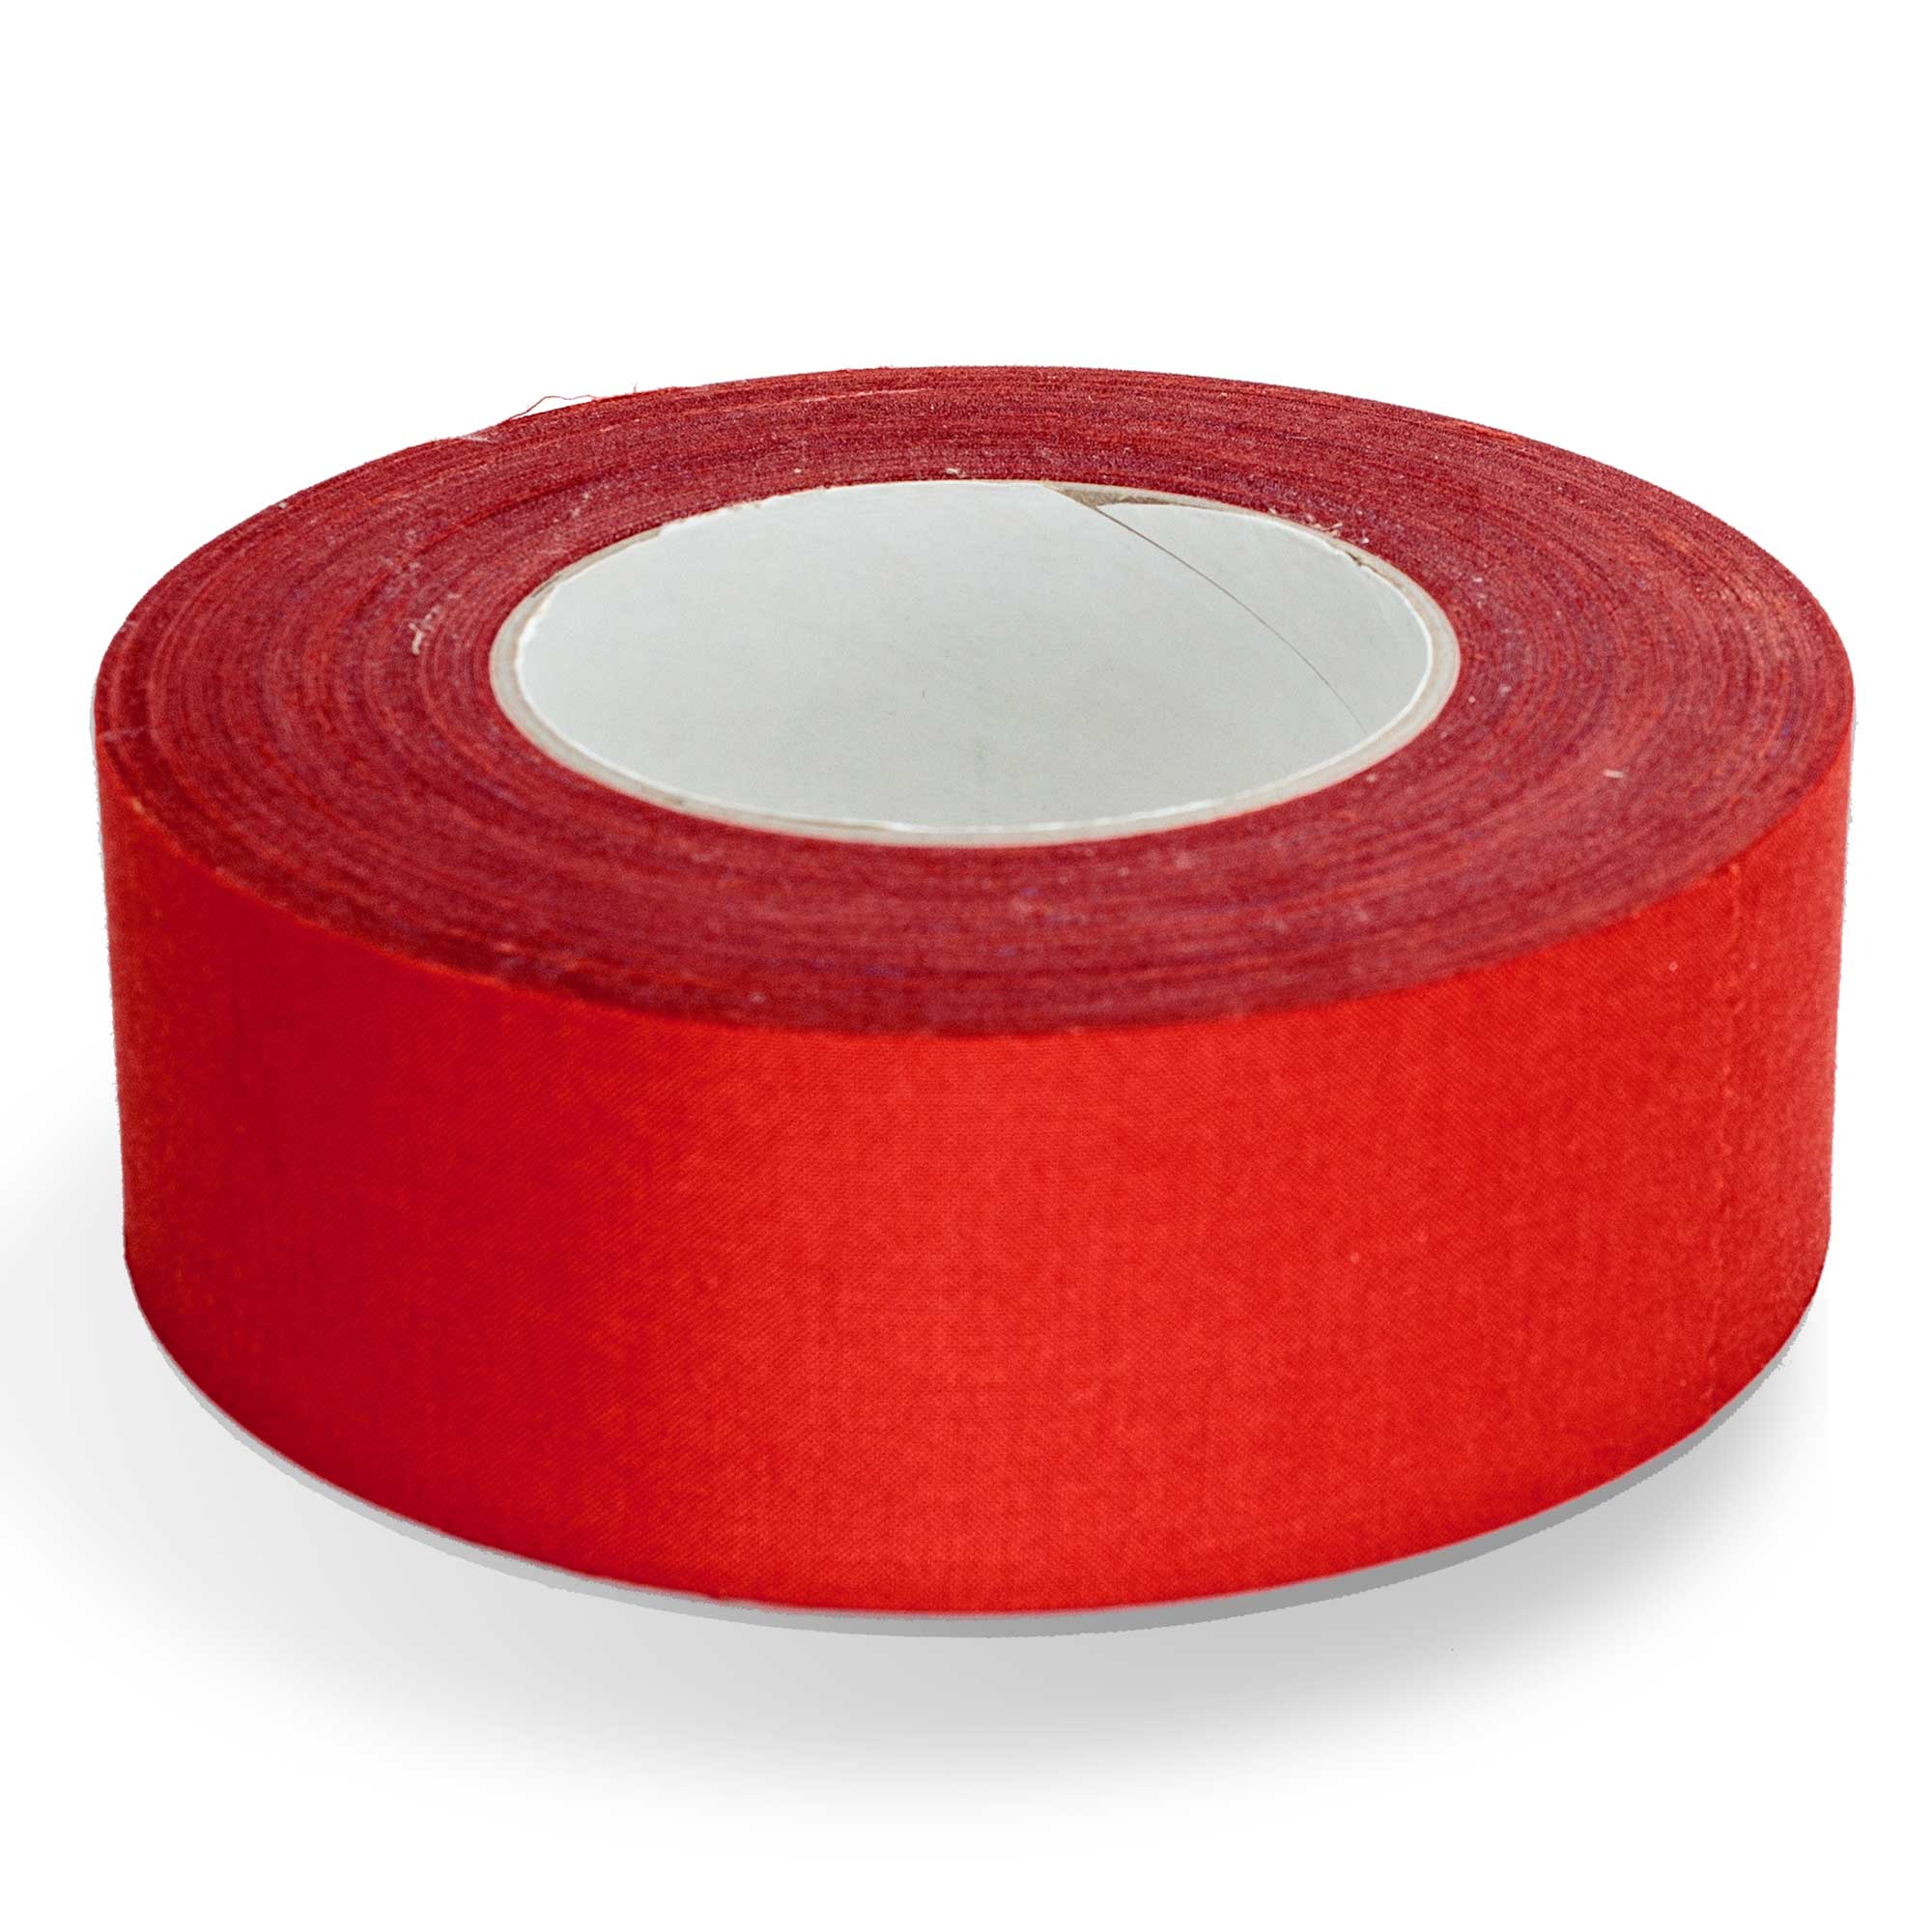 unpackaged red 5cm wide tape